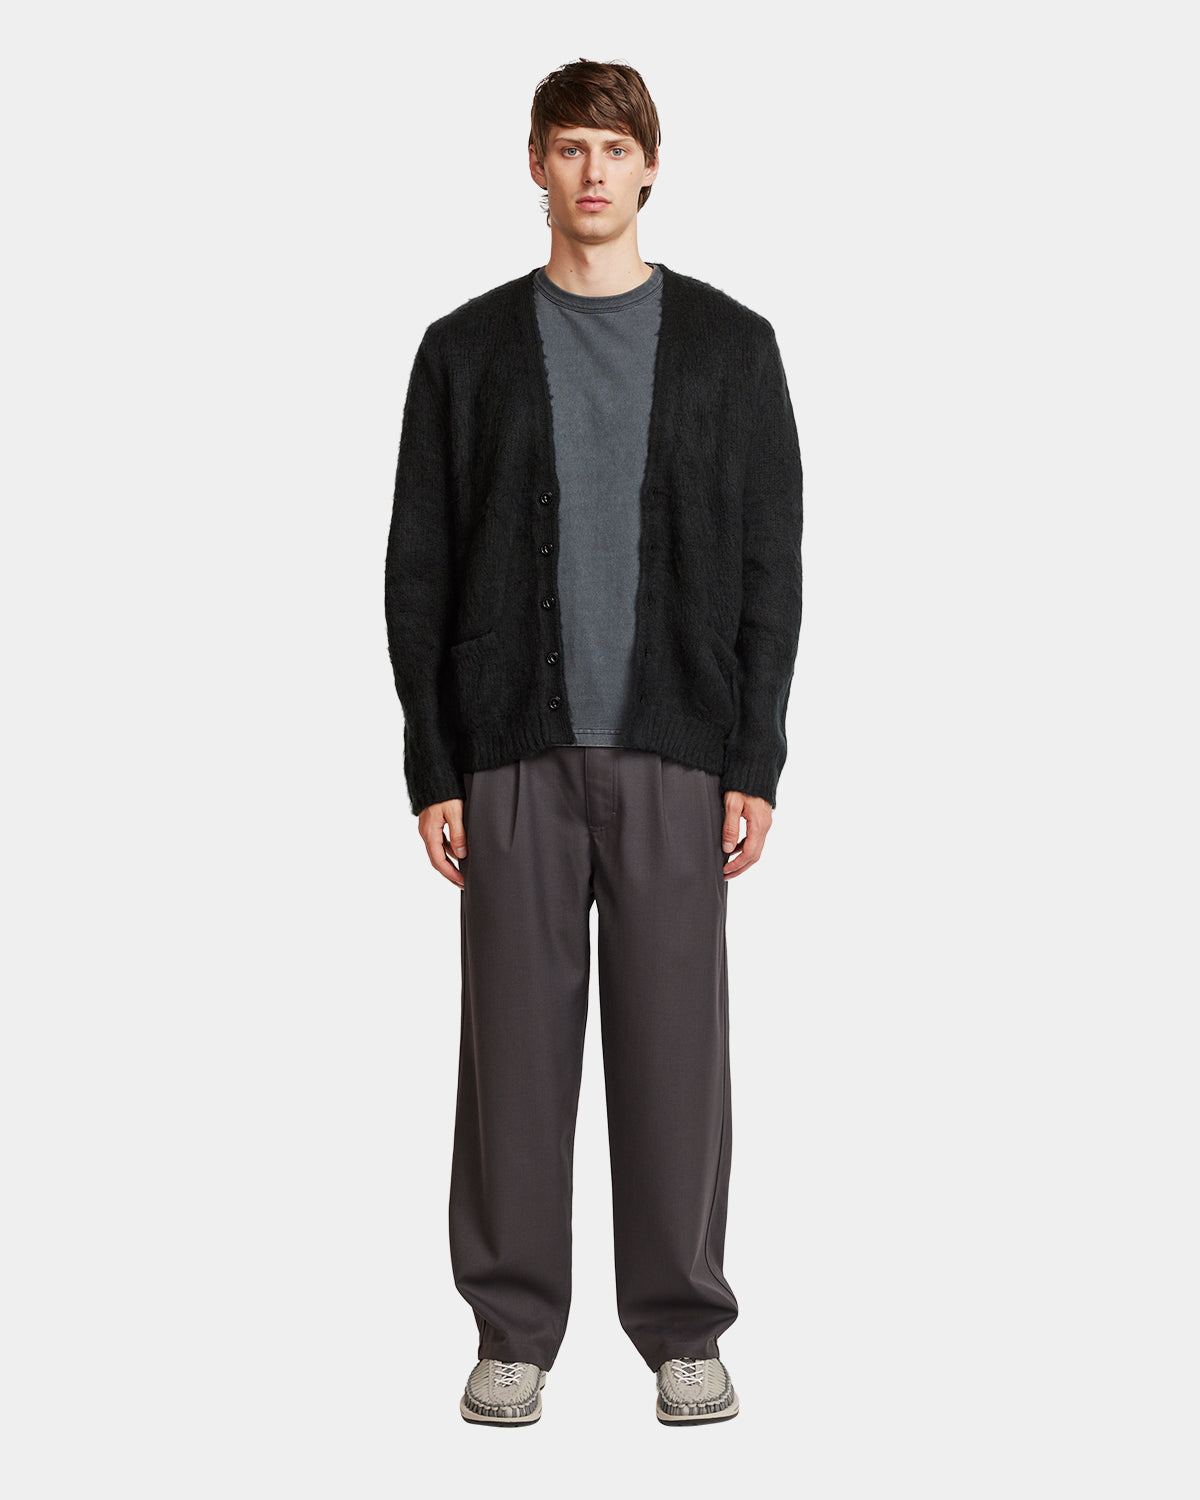 Pleated Pant - Charcoal